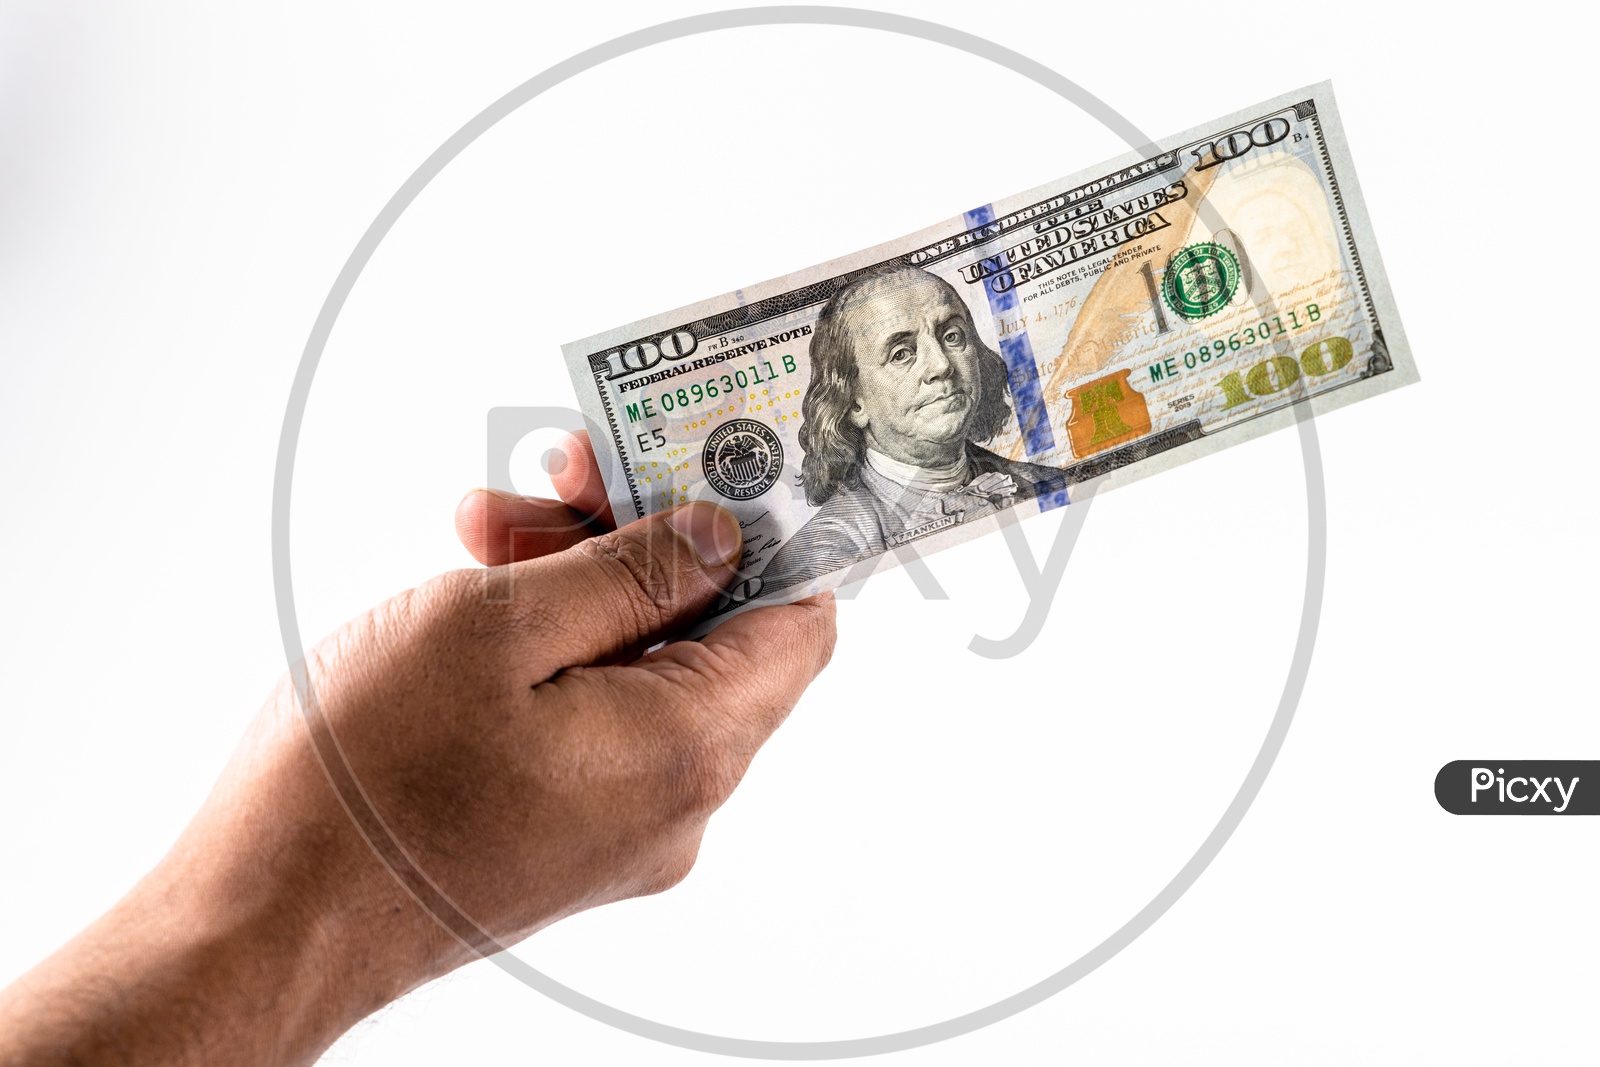 A Man Holding US Hundred Dollar Bills  or Currency  Bundle  in Hand On an Isolated White Background